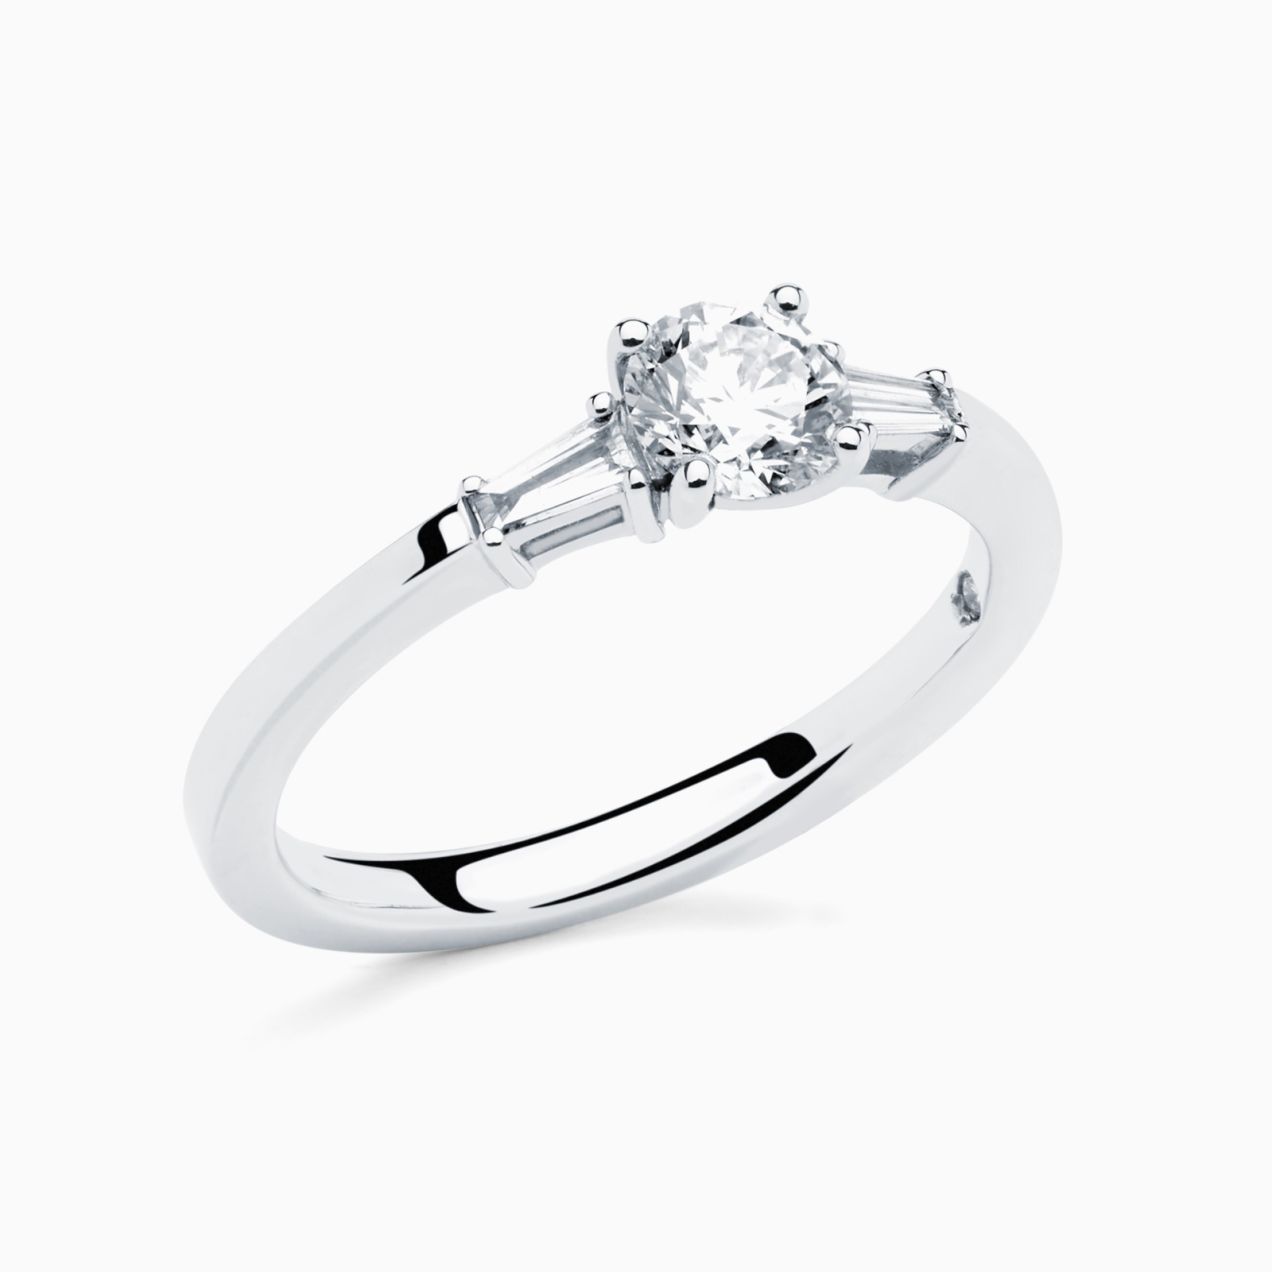 White gold engagement ring with central diamond and diamonds typers